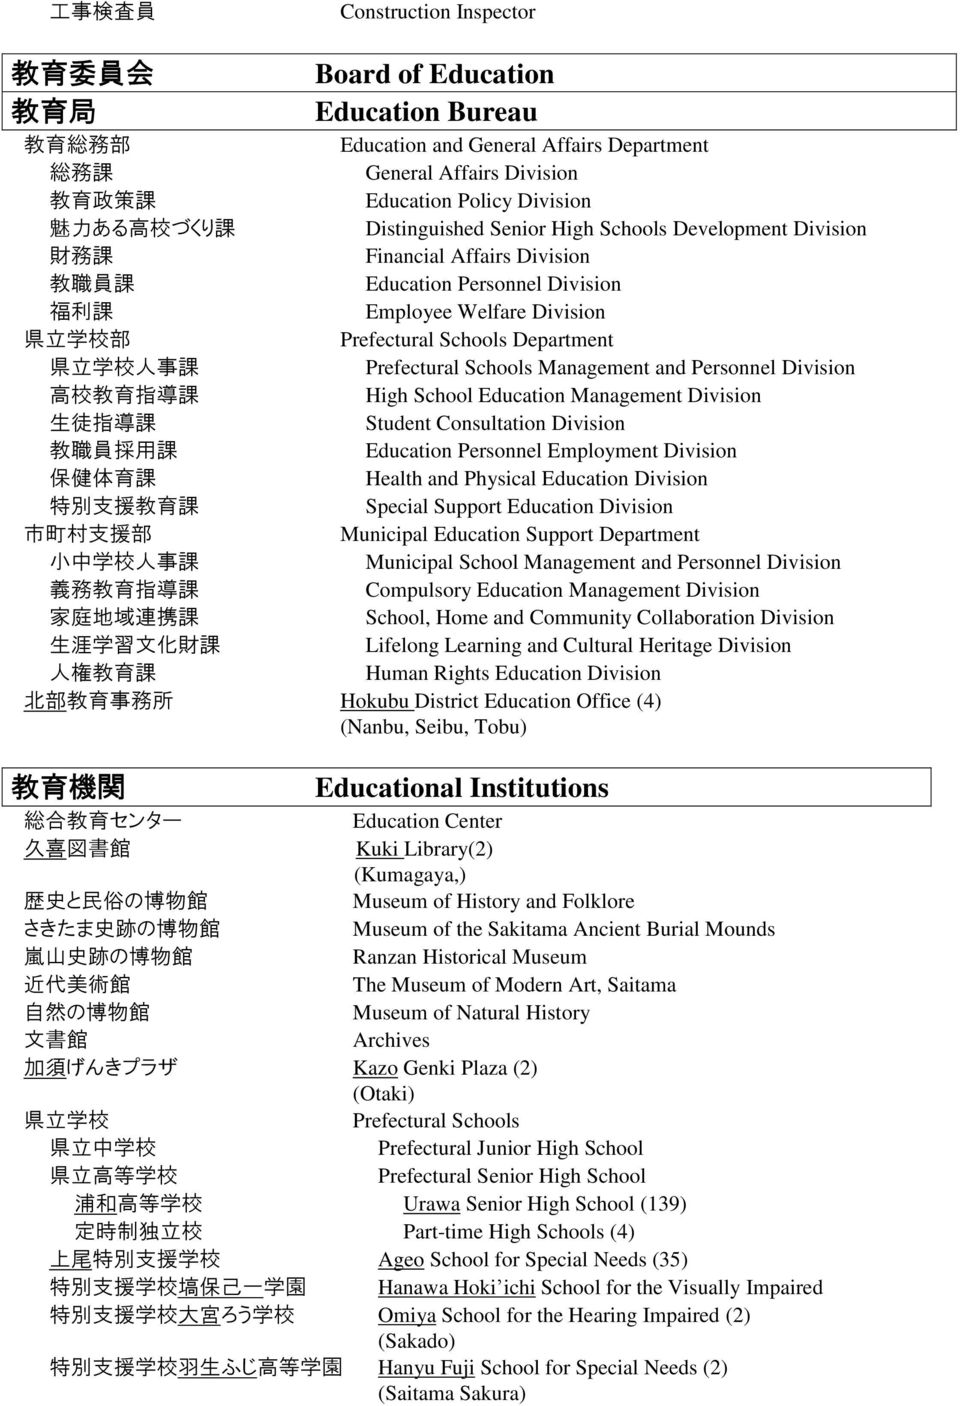 Prefectural Schools Department 県 立 学 校 人 事 課 Prefectural Schools Management and Personnel Division 高 校 教 育 指 導 課 High School Education Management Division 生 徒 指 導 課 Student Consultation Division 教 職